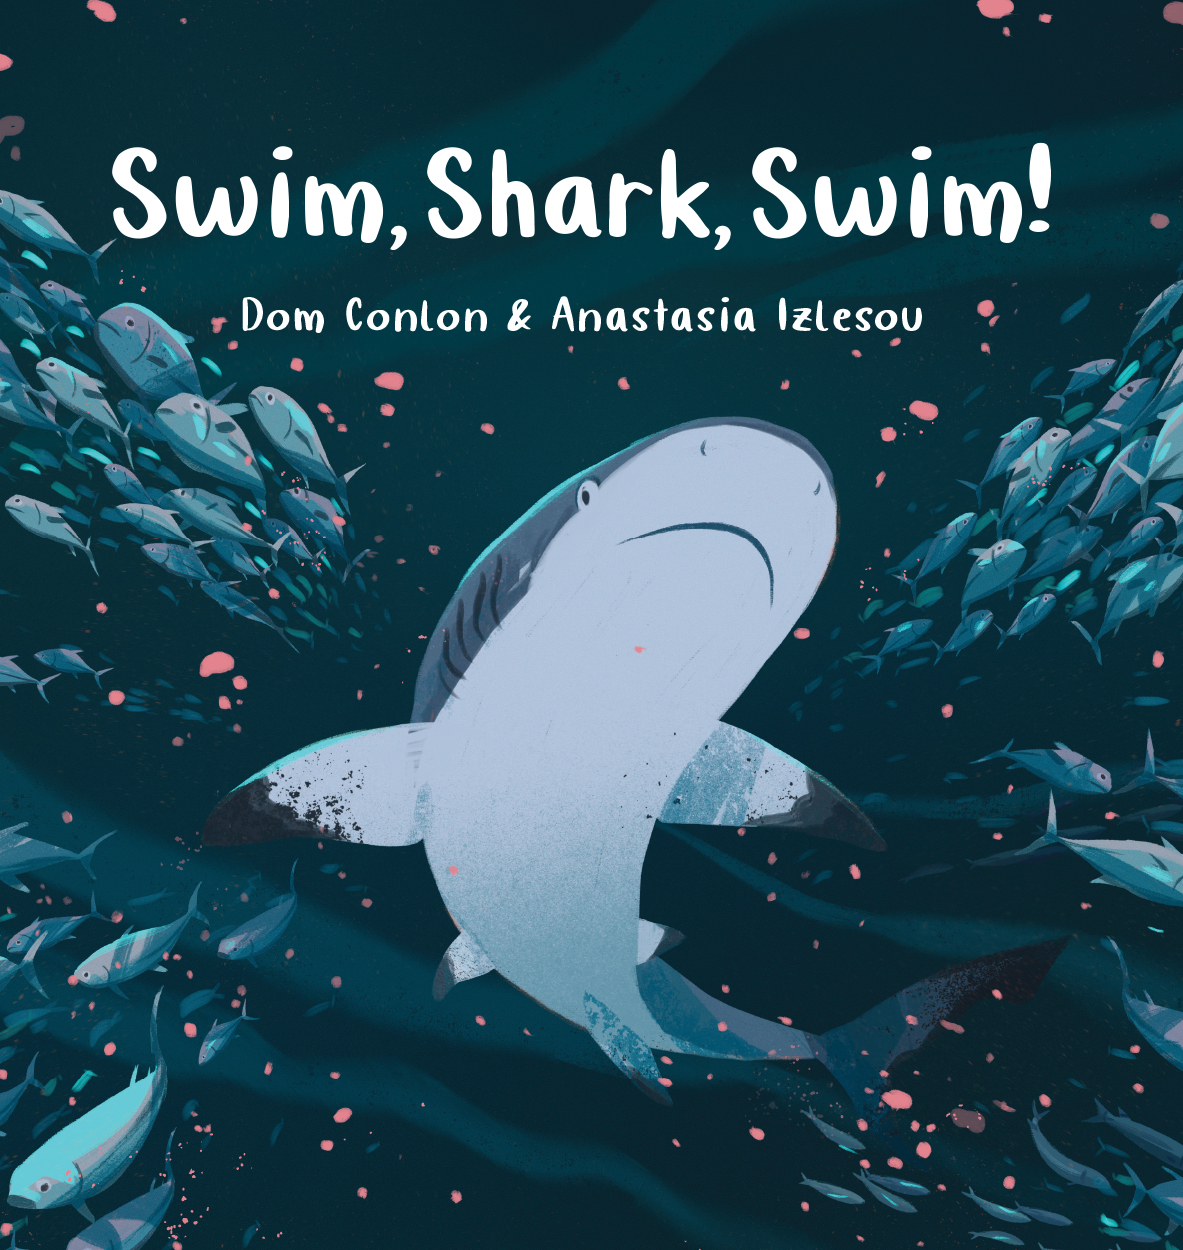 Cover of 'Swim, Shark Swim!' featuring an illustration of a blacktip reef shark bursting through the middle of a school of fish.